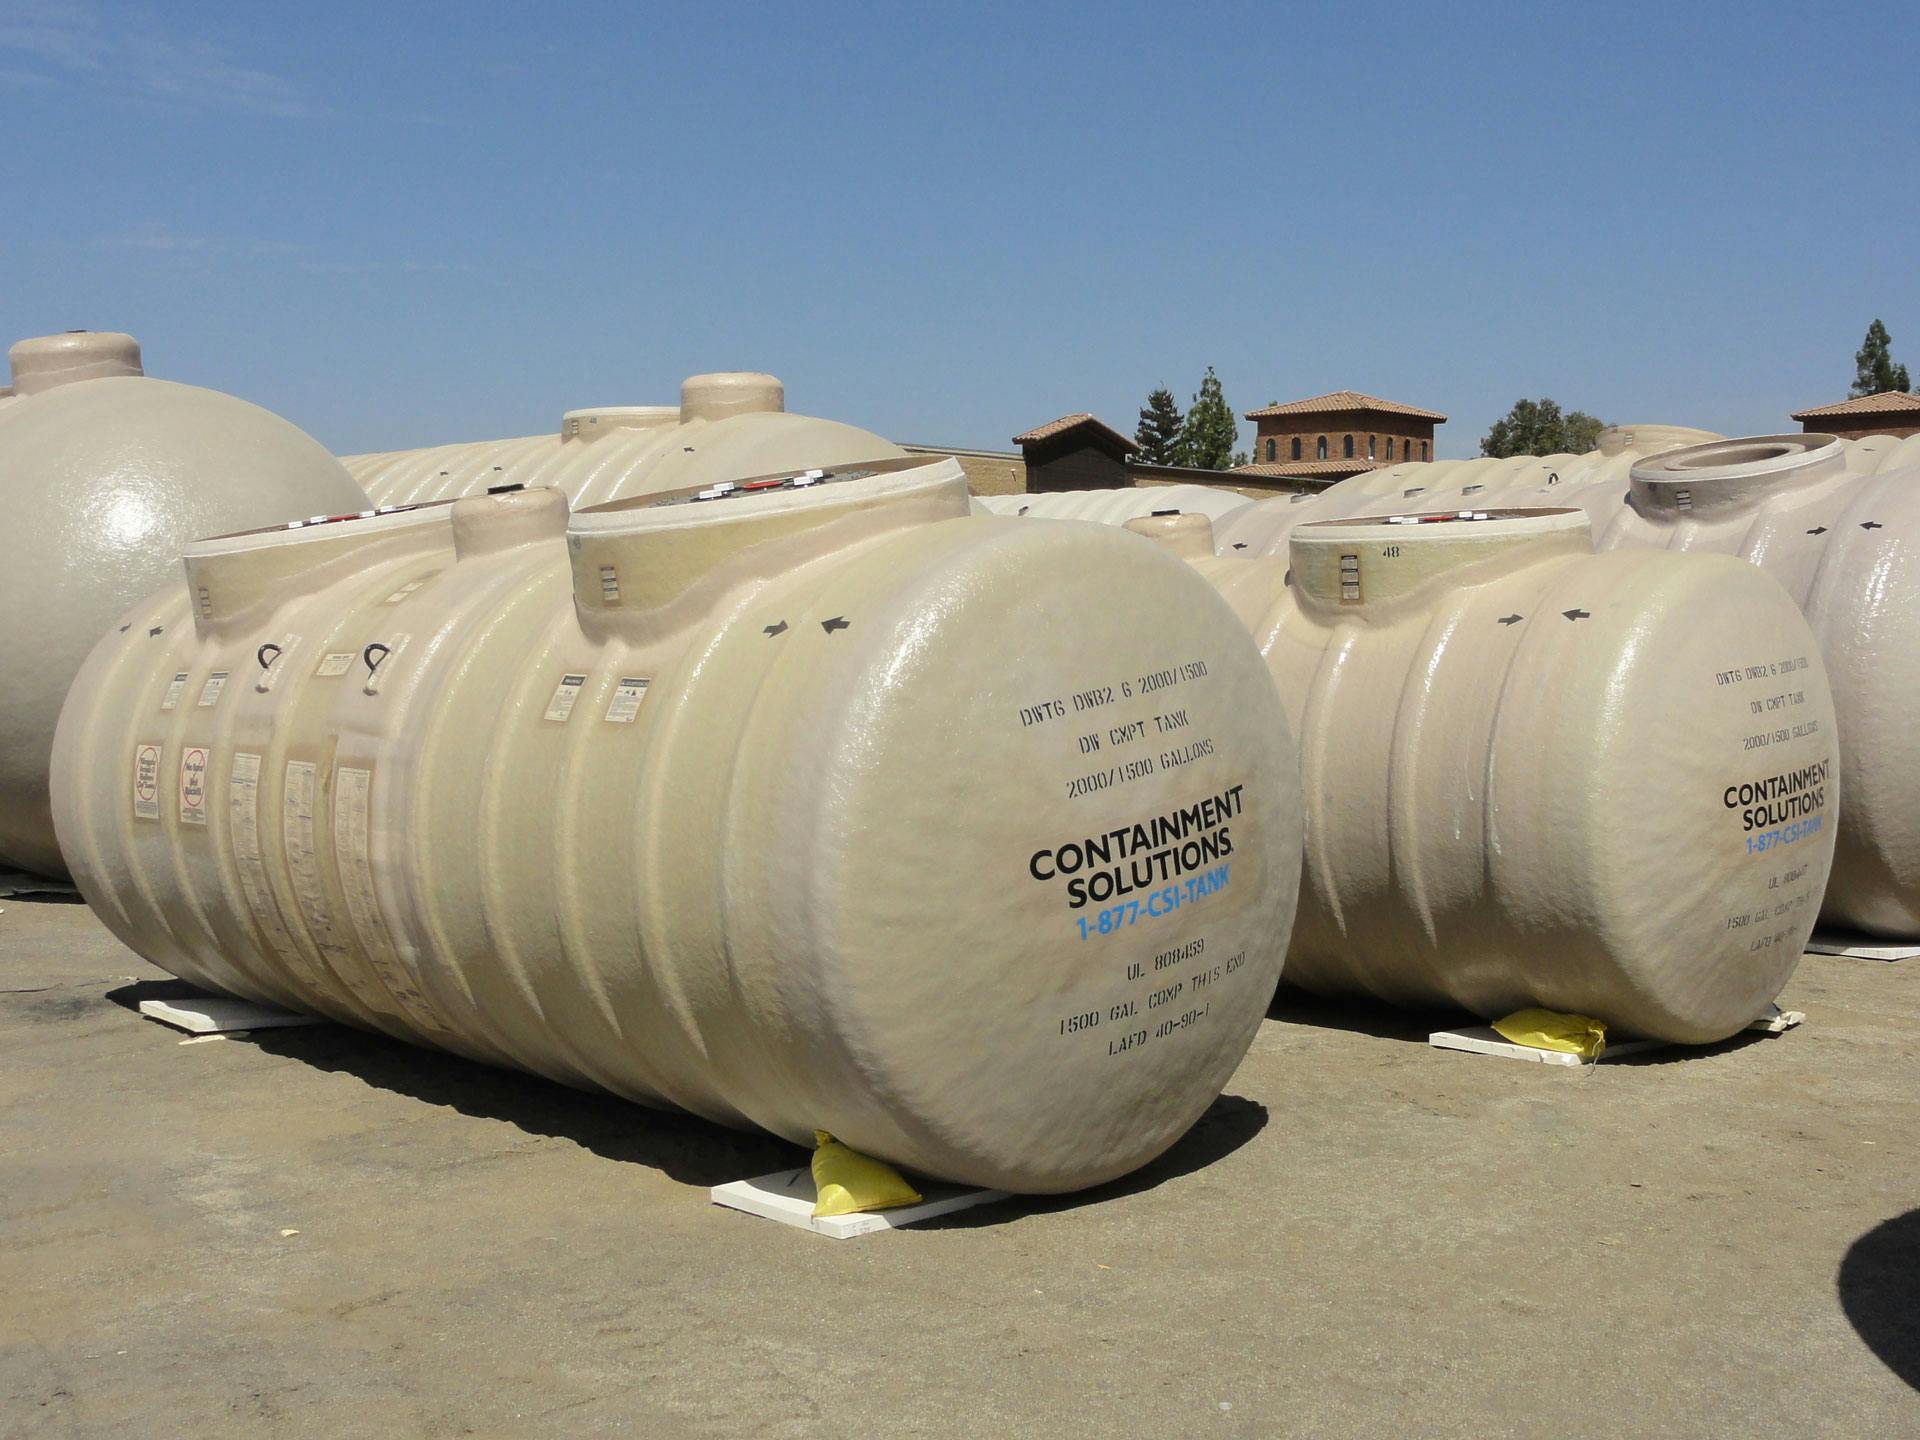 Fiberglass compartment storage tanks on the ground at the factory.